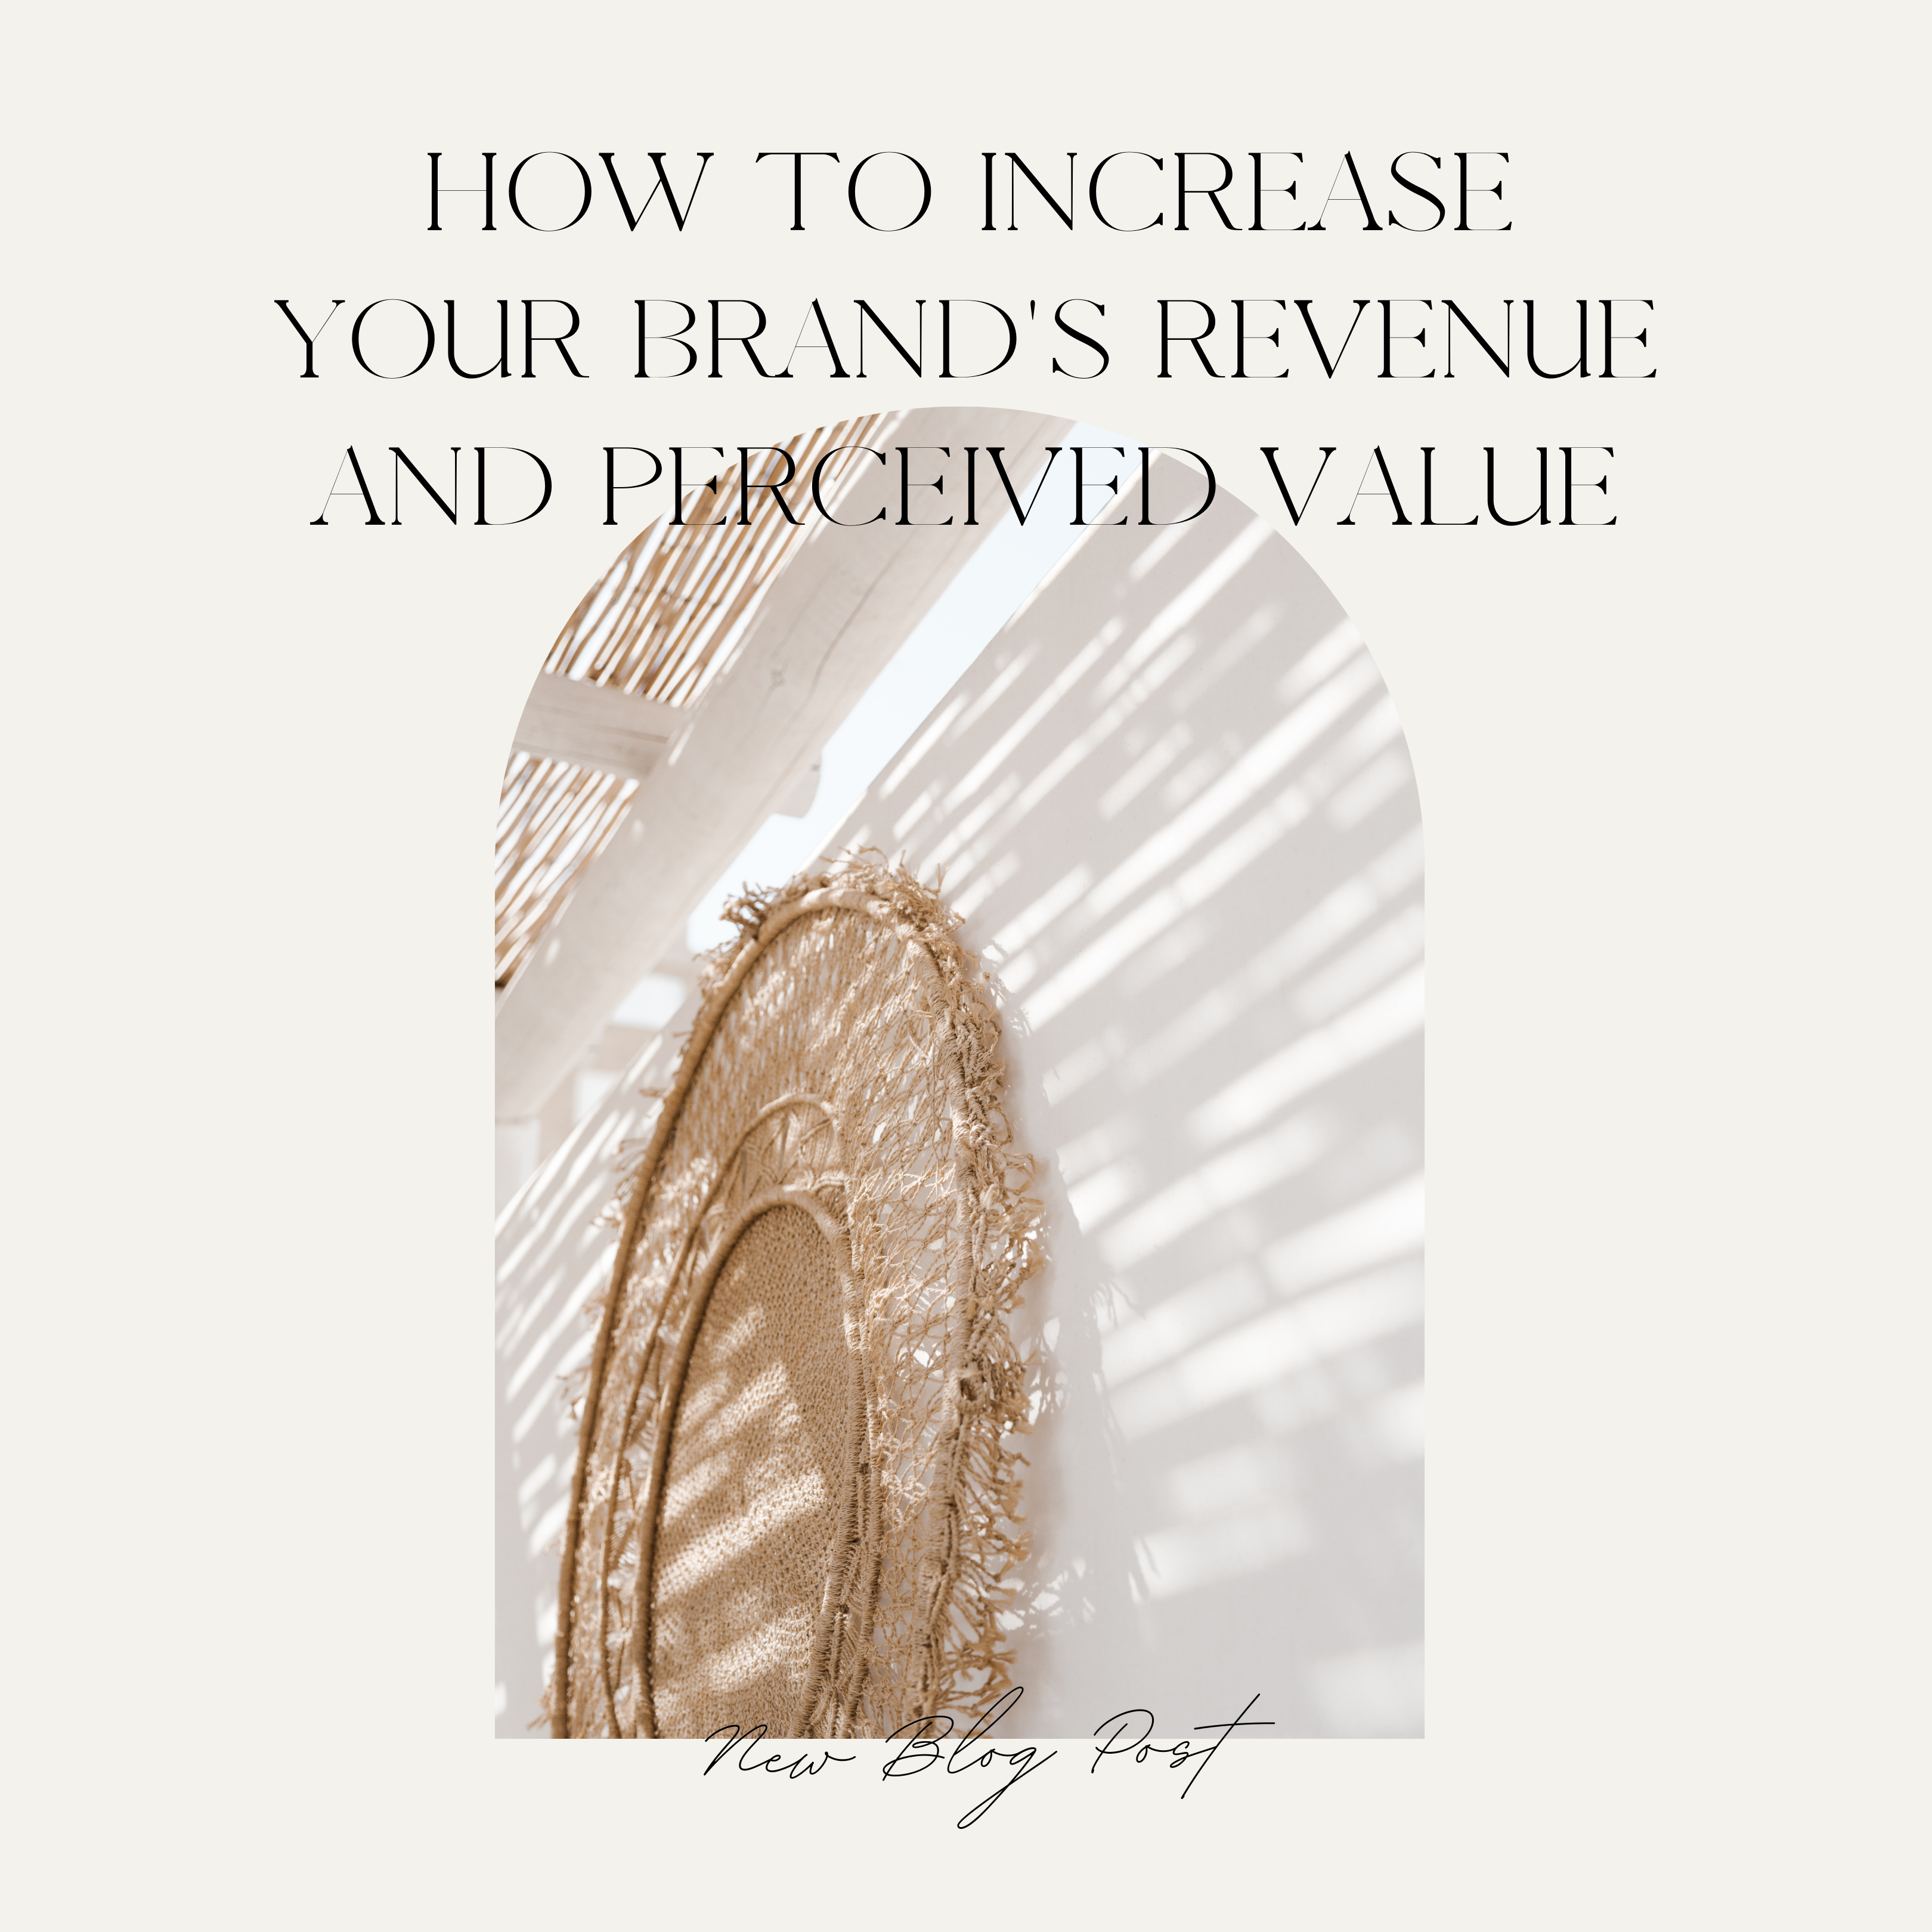 How To Increase Your Brand's Revenue and Perceived Value